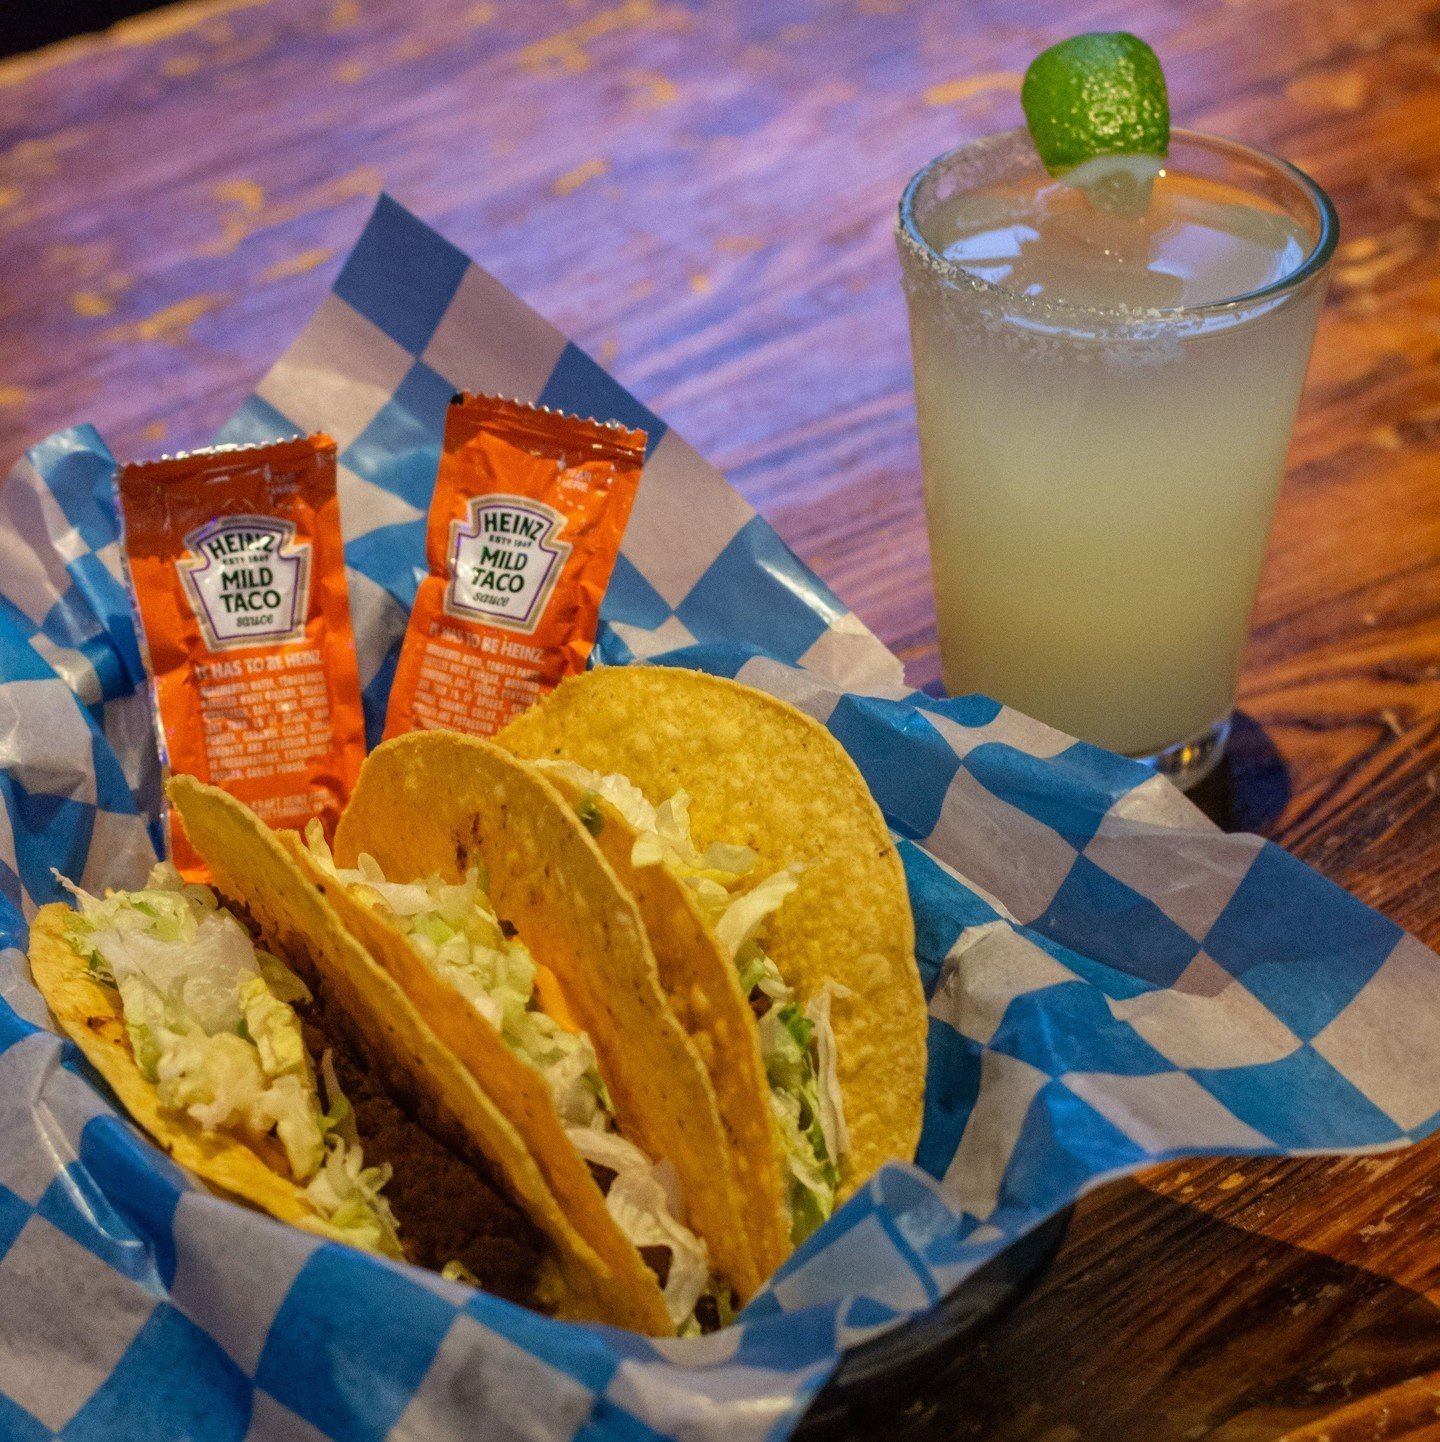 We&rsquo;re serving up tacos, margs and tequila shots all day long at the Moonlighter! Not just because it&rsquo;s Cinco de Mayo. We do this everyday! We will be serving up Corona on Draft today though, so come and get it while you can! White Sox pla